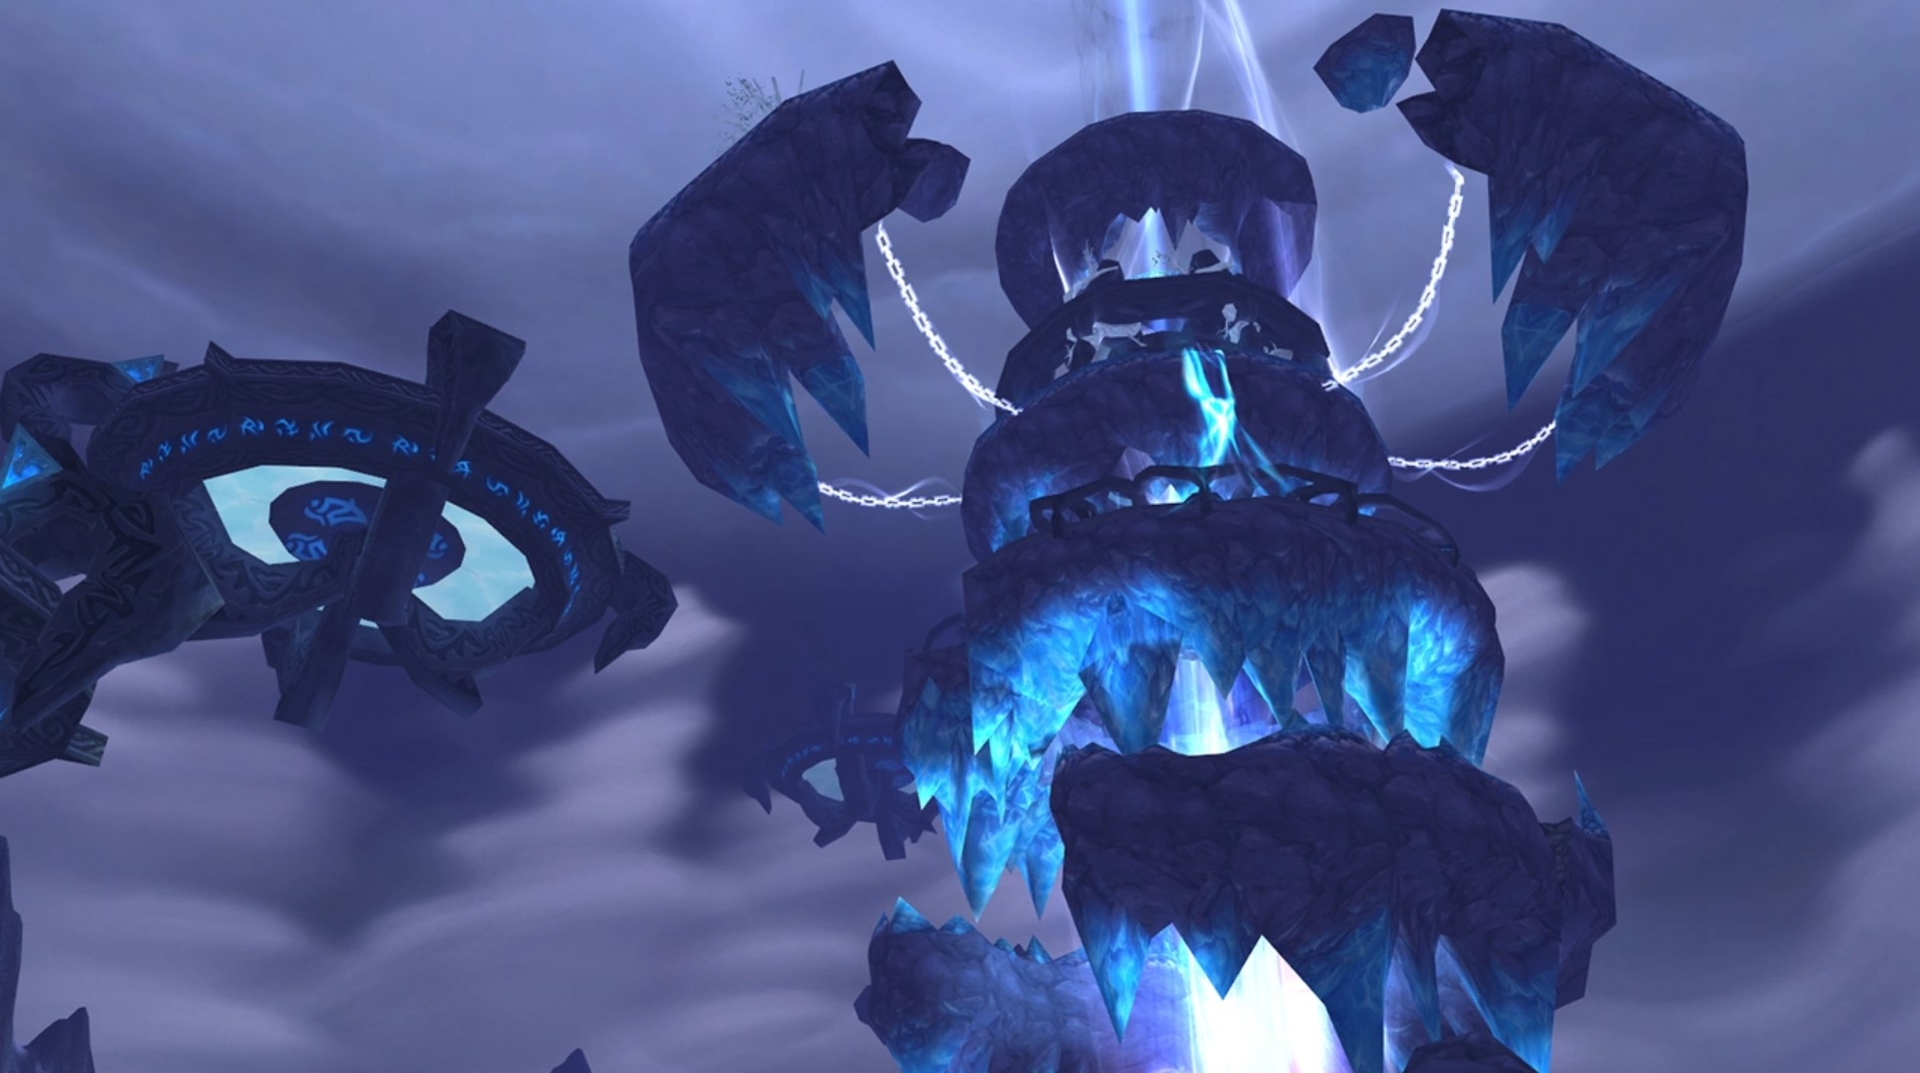 In this article, we are going to be covering how to get to Nexus WotLK Classic, as well as the bosses, their mechanics, how to defeat them, and all the loot and the achievements.